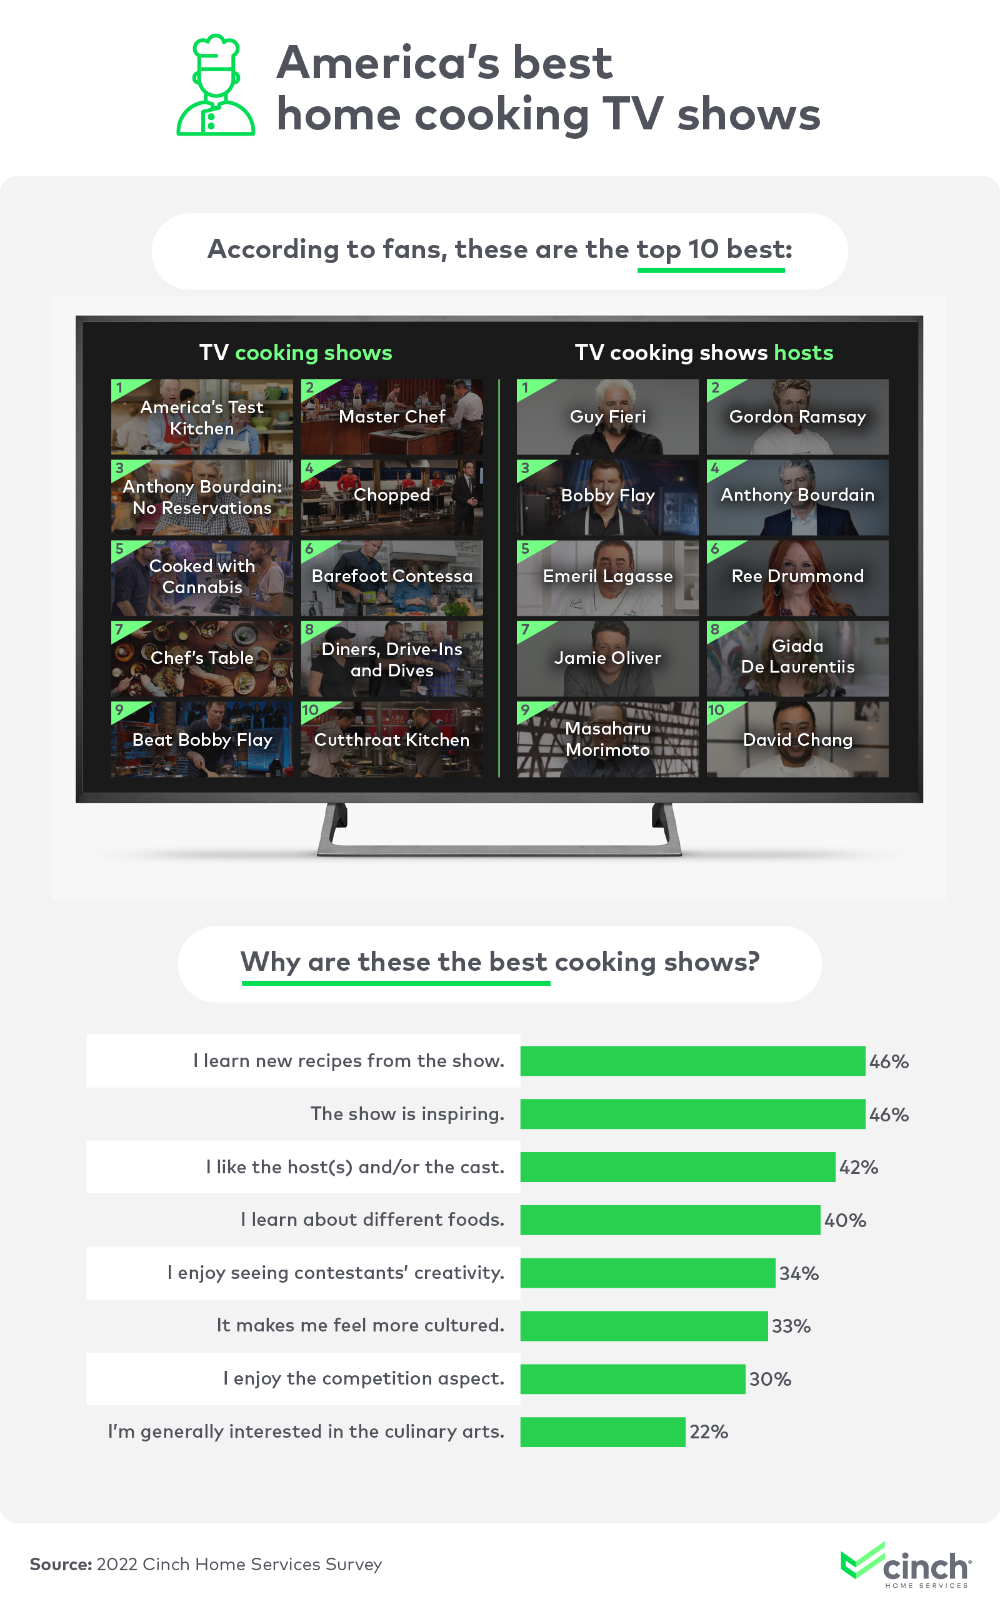 Infographic that explores America's best home cooking TV shows and why according to fans.